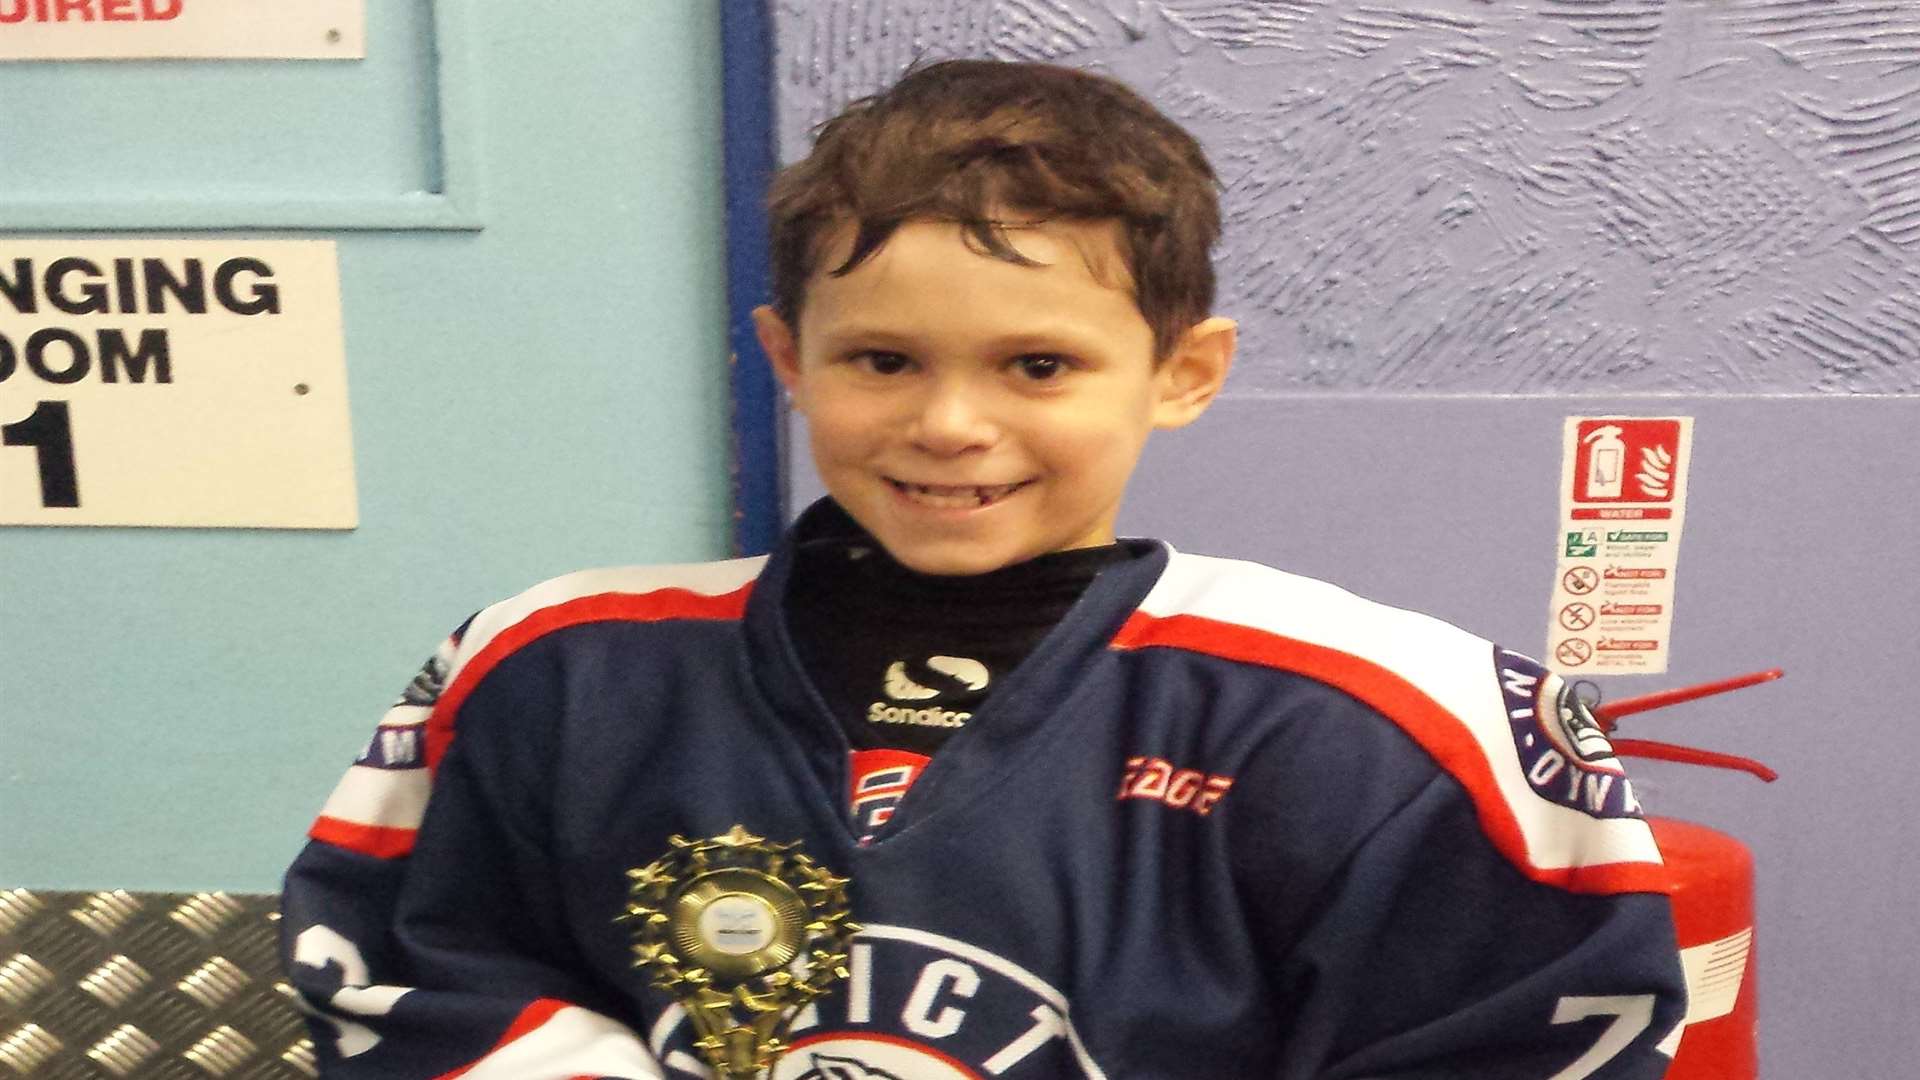 Jamie Morton needs £3000 to be able to play ice hockey in the USA in April.